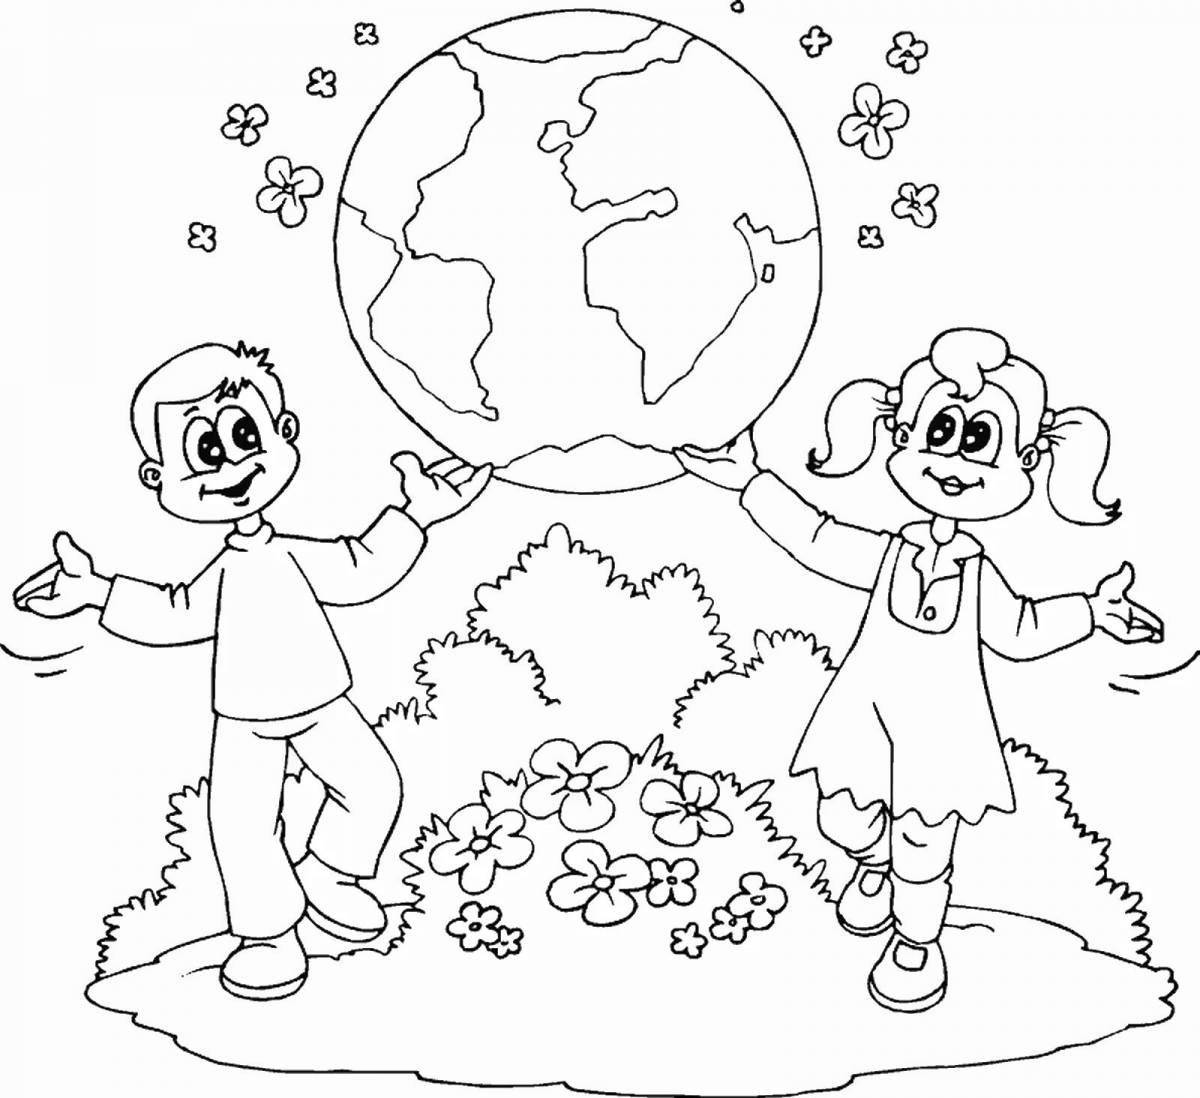 Coloring page dazzling world on earth